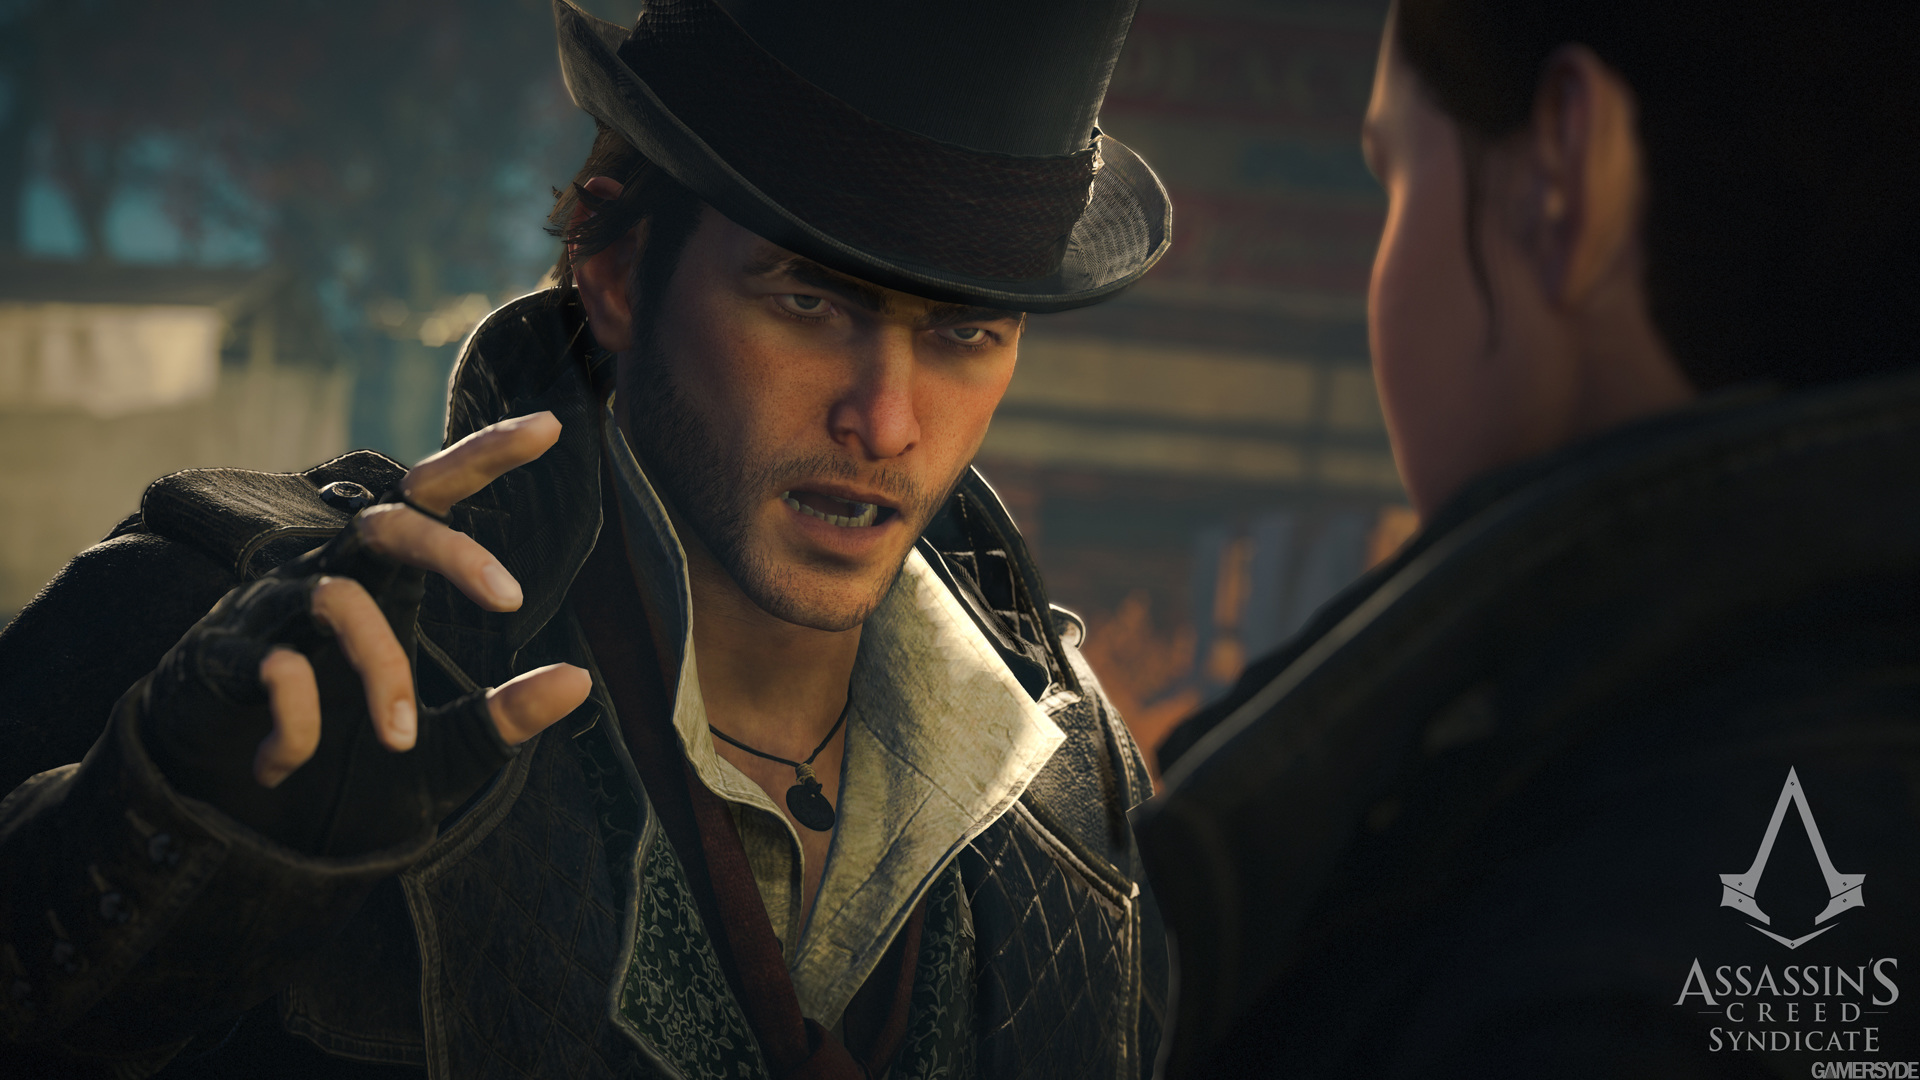 image_assassin_s_creed_syndicate-28924-3228_0004.jpg